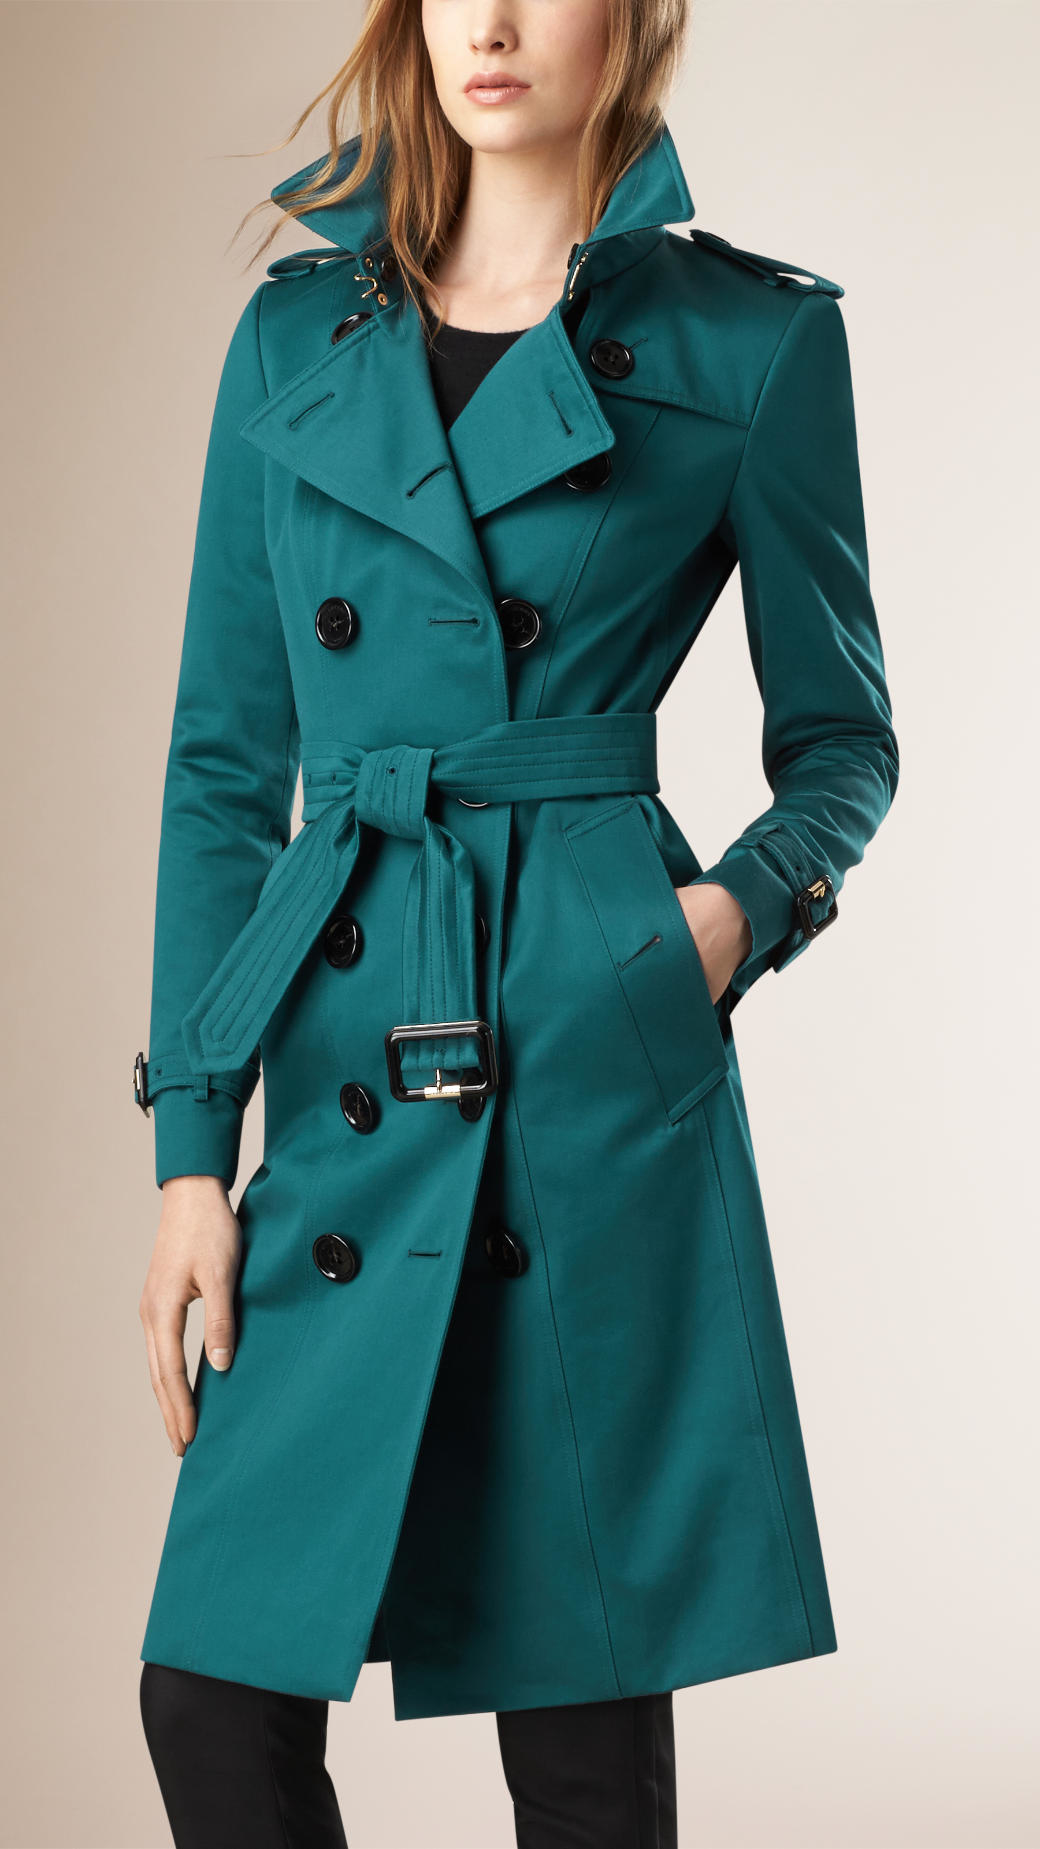 Burberry Cotton Sateen Trench Coat in Blue - Lyst